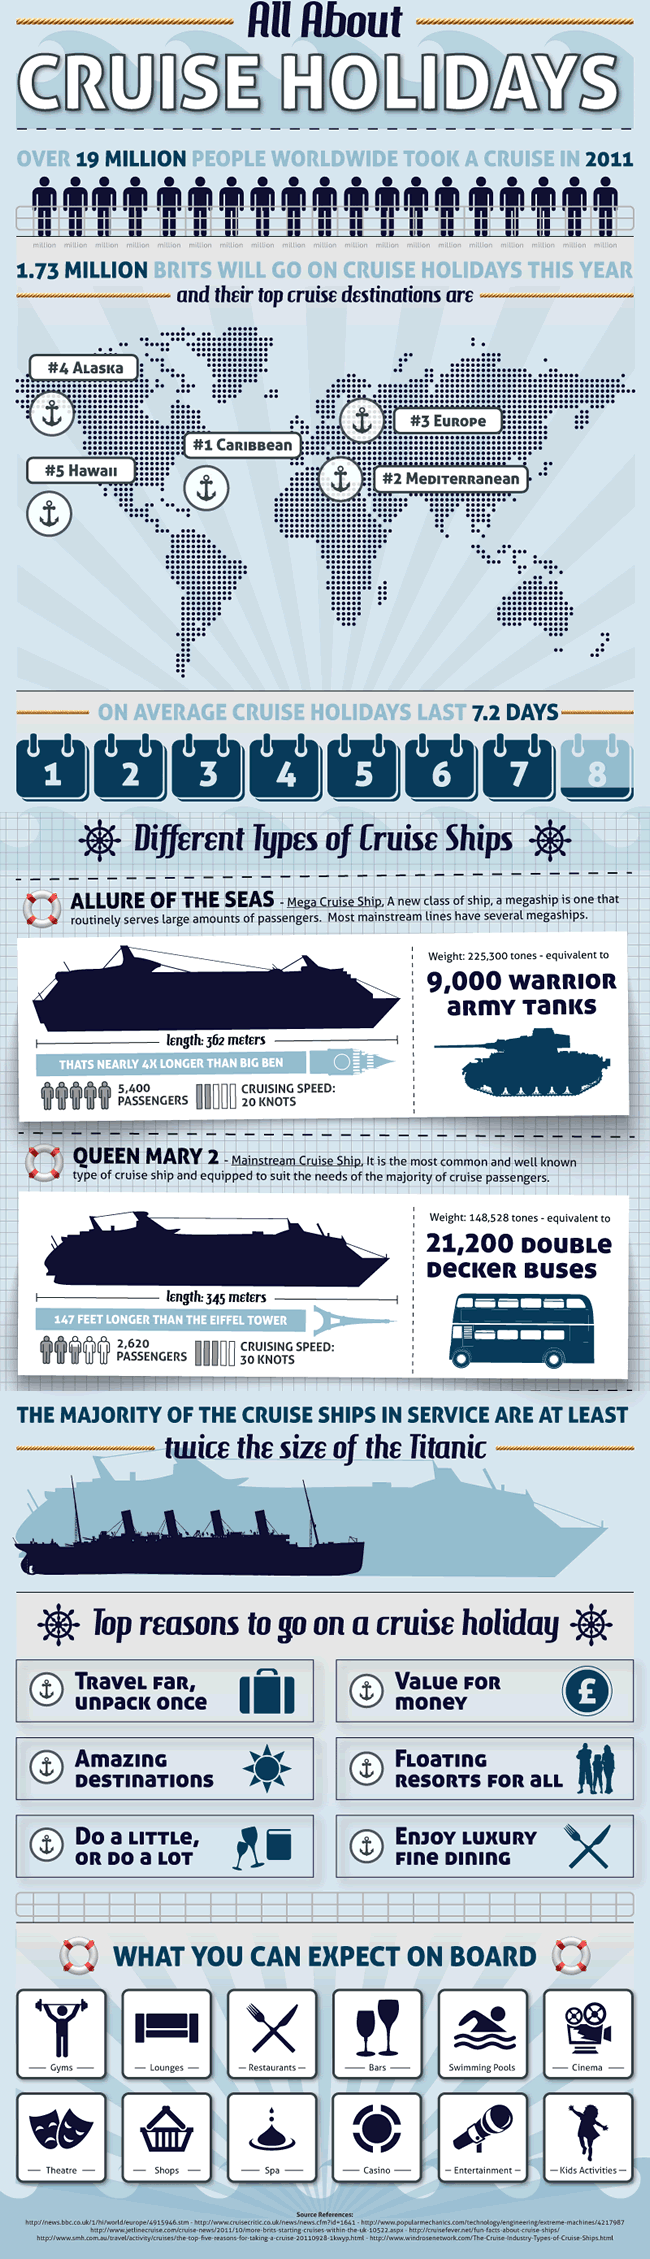 All About Cruise Holidays Infographic